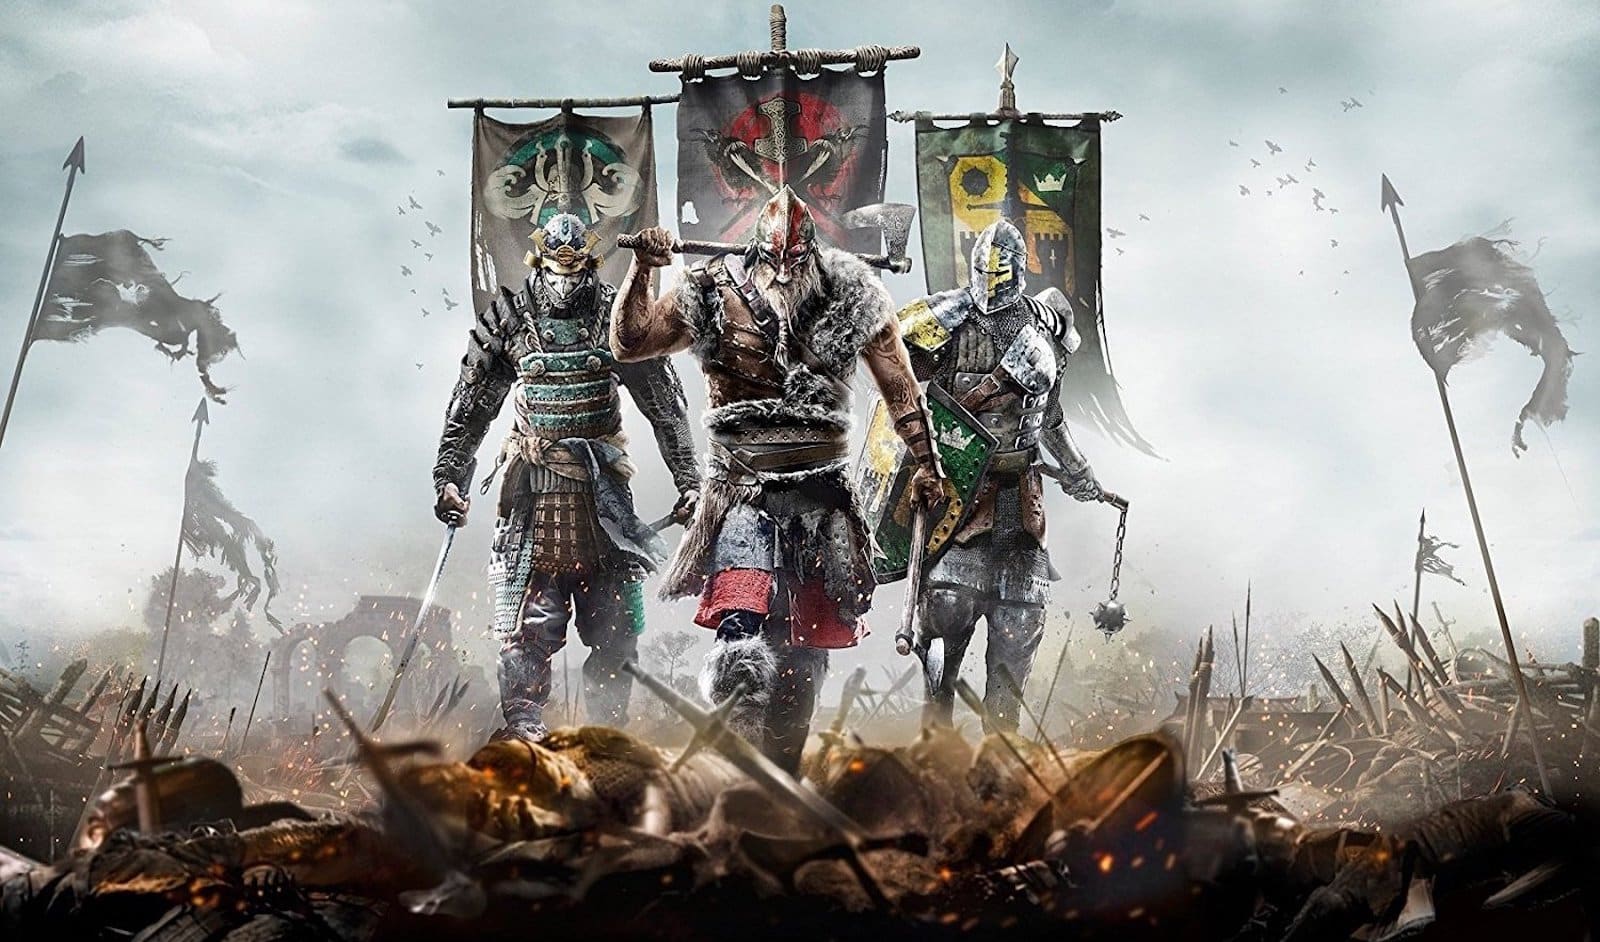 How to claim For Honor Prime Gaming reward drops (December 2021